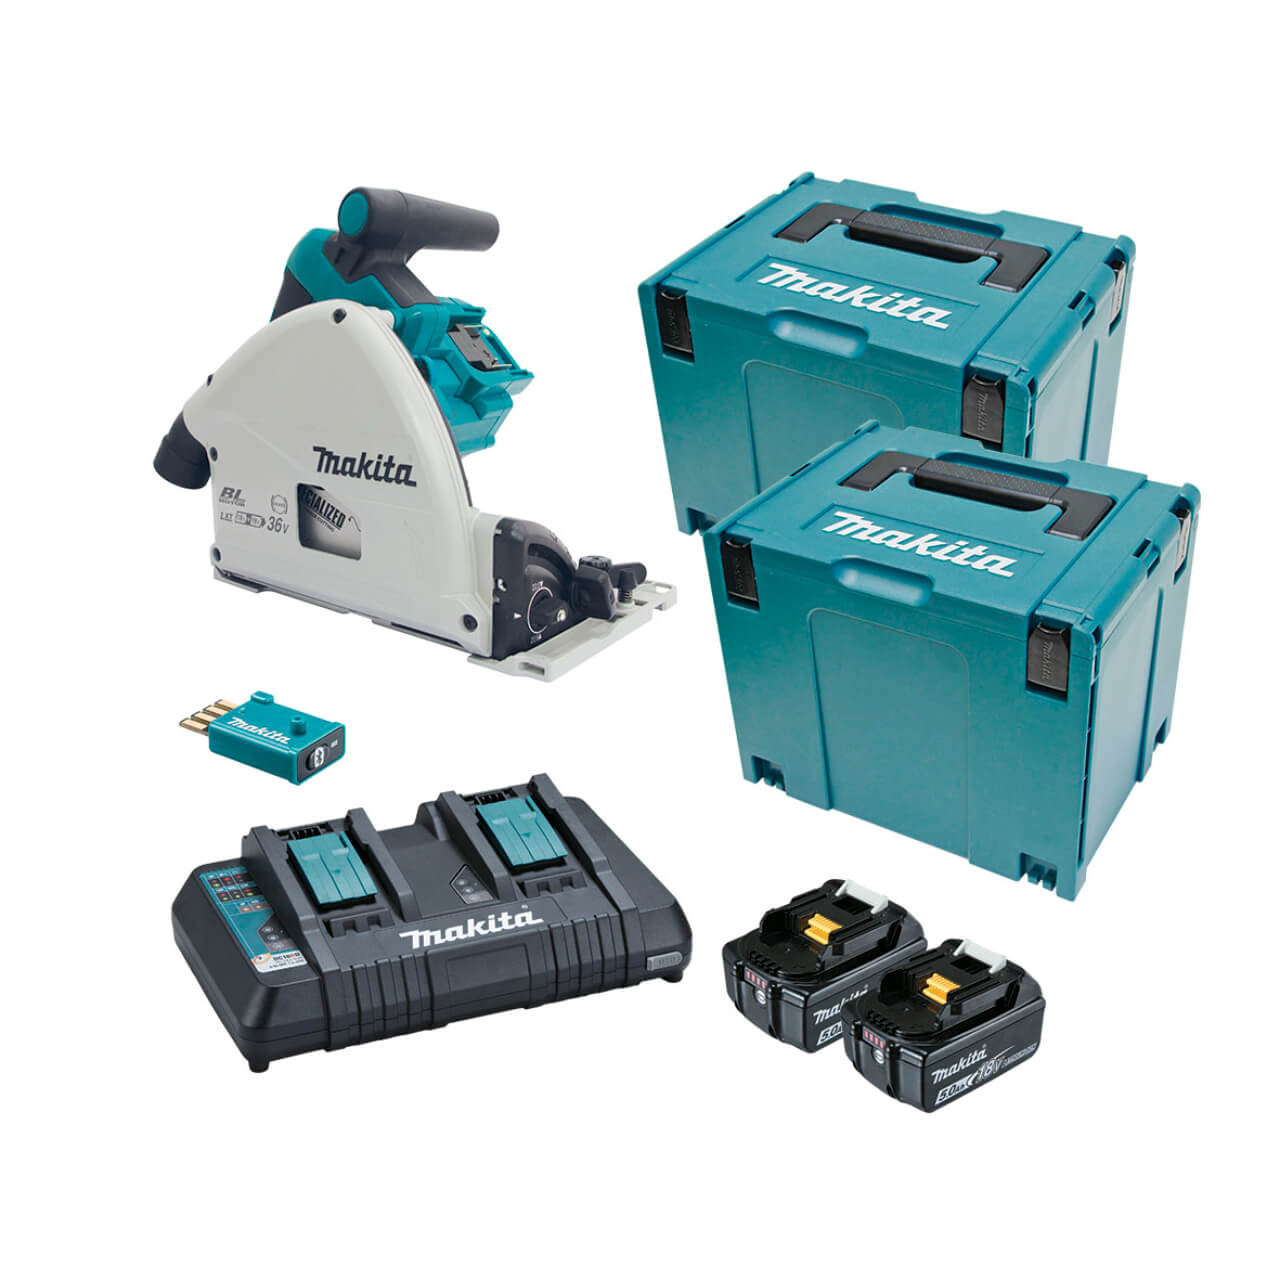 Makita 18Vx2 BRUSHLESS AWS 165mm Plunge Saw Kit - Includes 2 x 5.0Ah Batteries. Dual Port Rapid Charger & 2 x MakPac Case